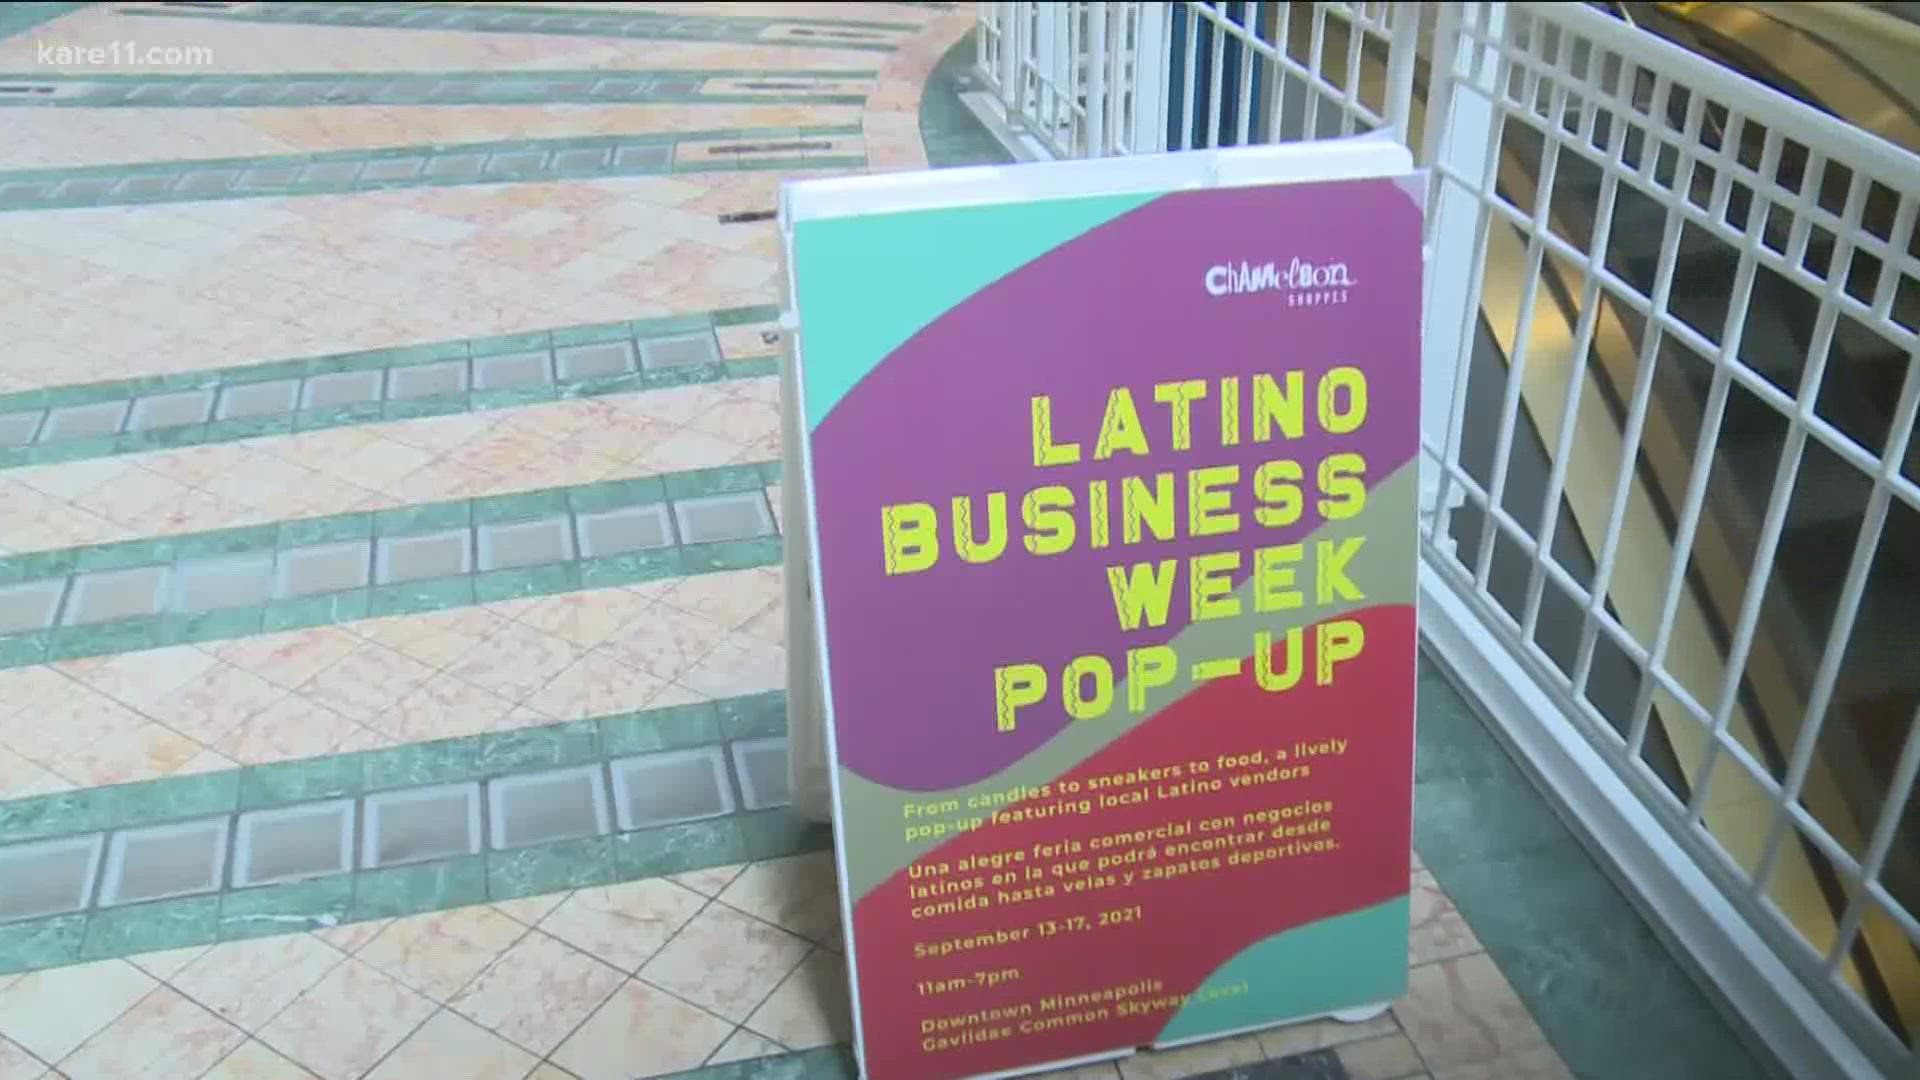 A pop-up shop is giving Latino businesses a chance to showcase their products in a downtown Minneapolis space.